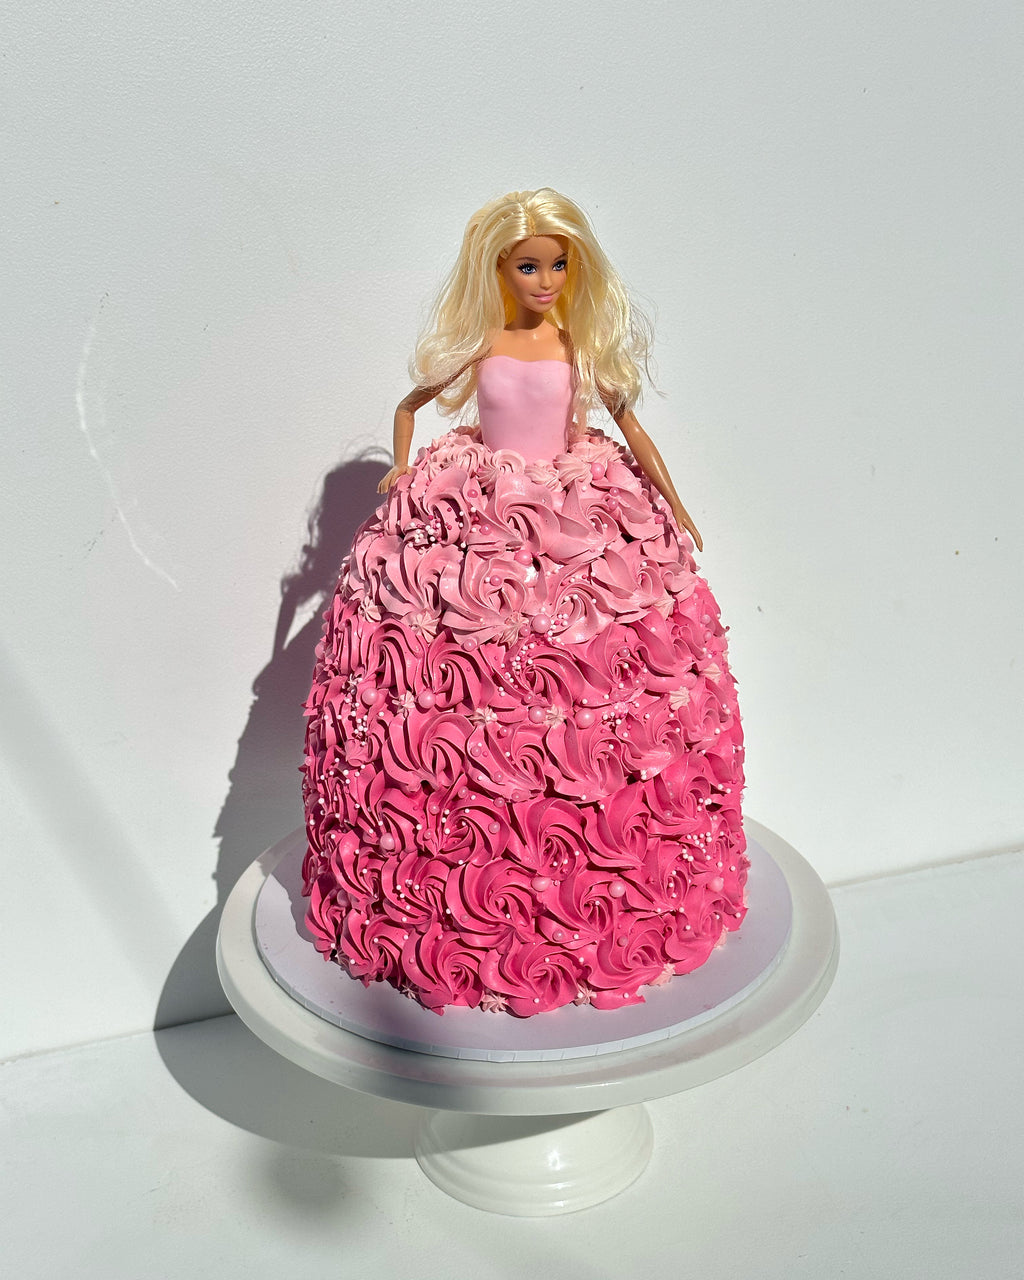 27+ Awesome Picture of Barbie Birthday Cakes - entitlementtrap.com | Barbie  birthday cake, Barbie doll birthday cake, Barbie cake